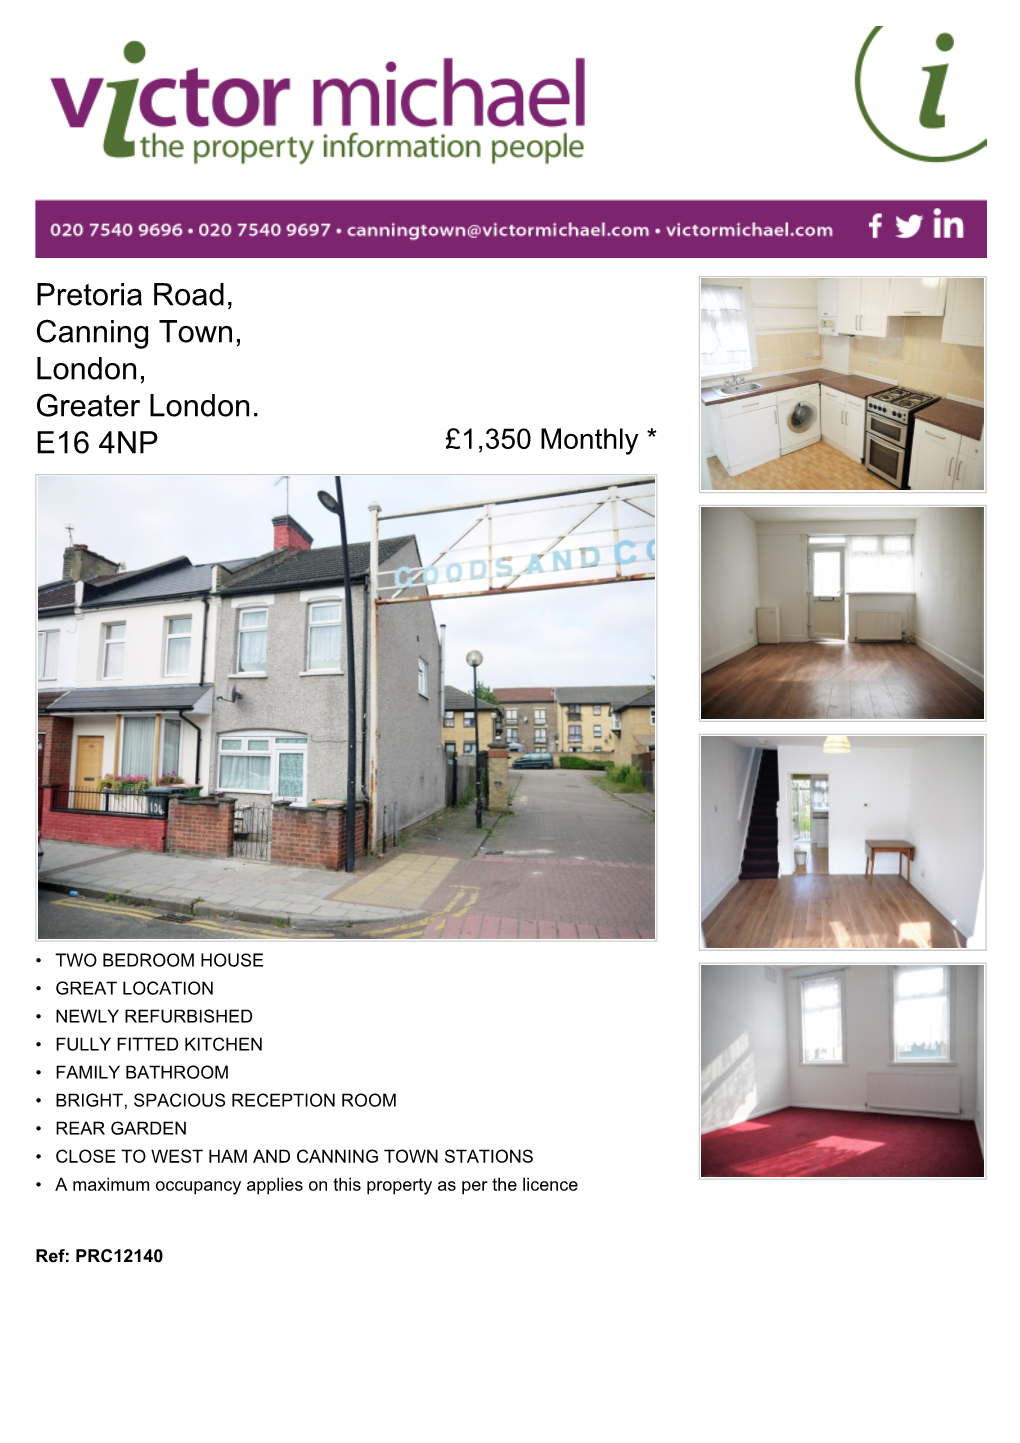 Pretoria Road, Canning Town, London, Greater London. E16 4NP £1,350 Monthly *